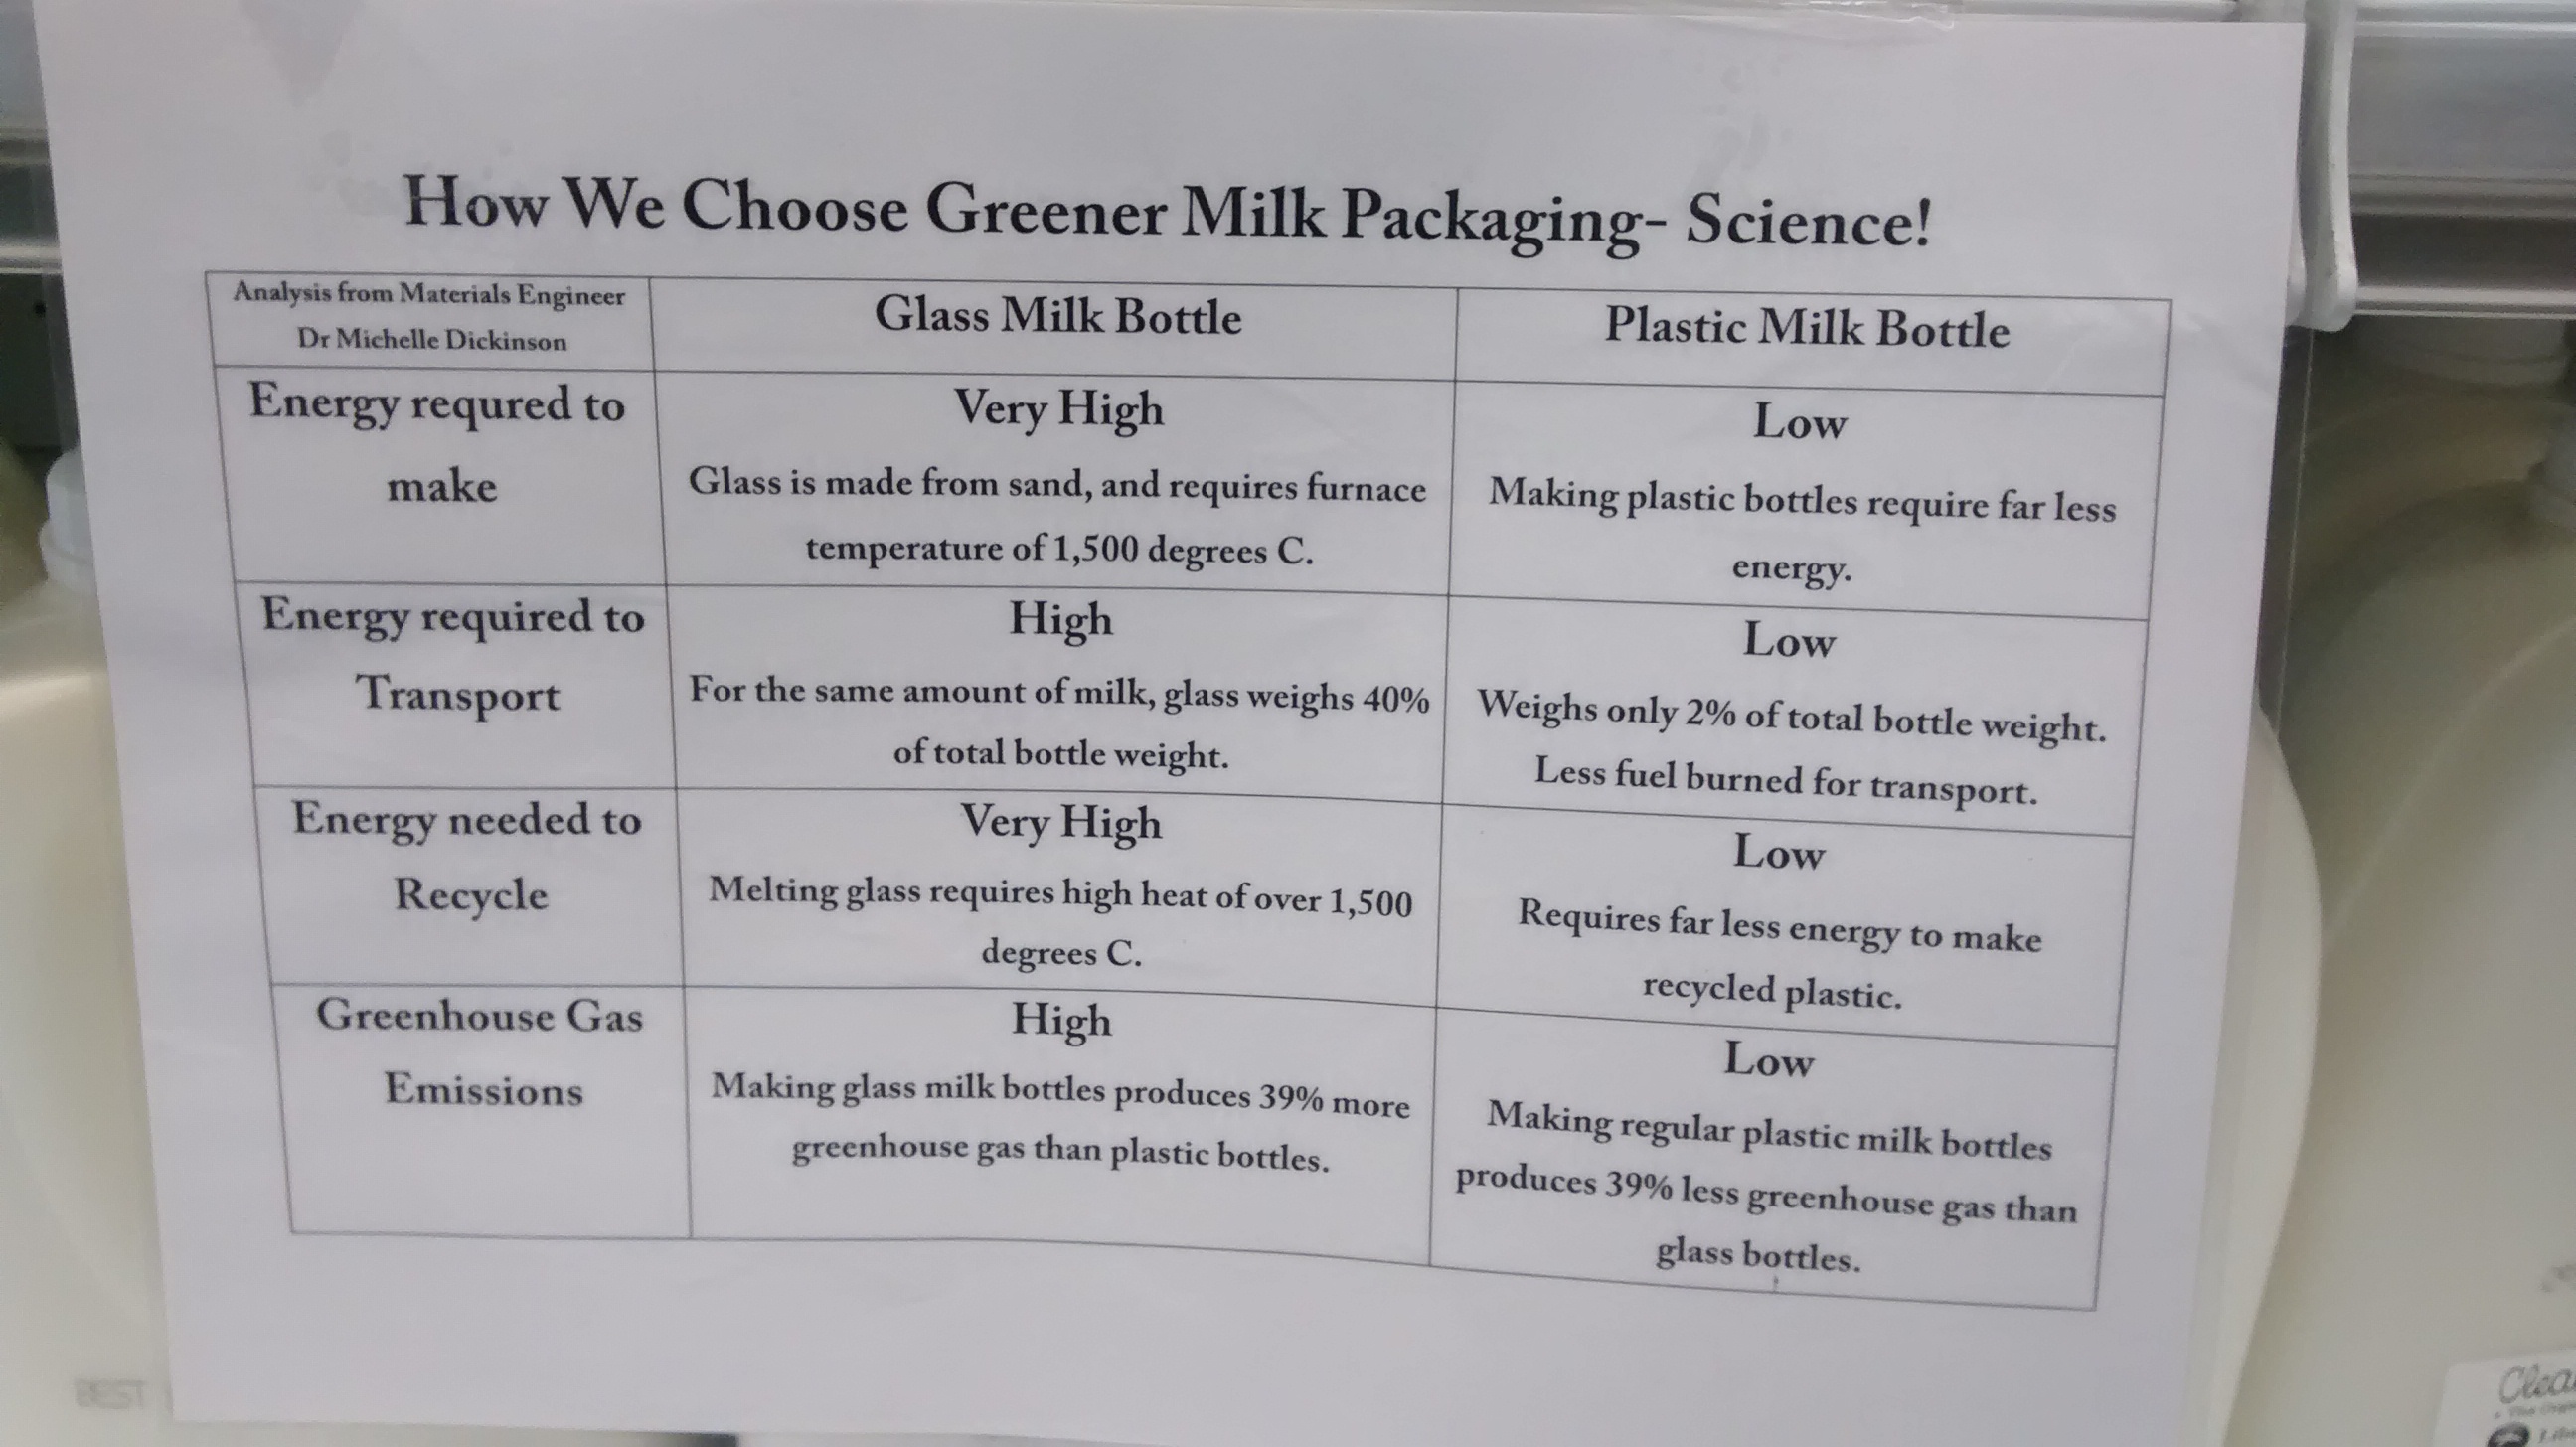 Greener than What?: the shortfalls of comparing milk packaging options within the disposability paradigm